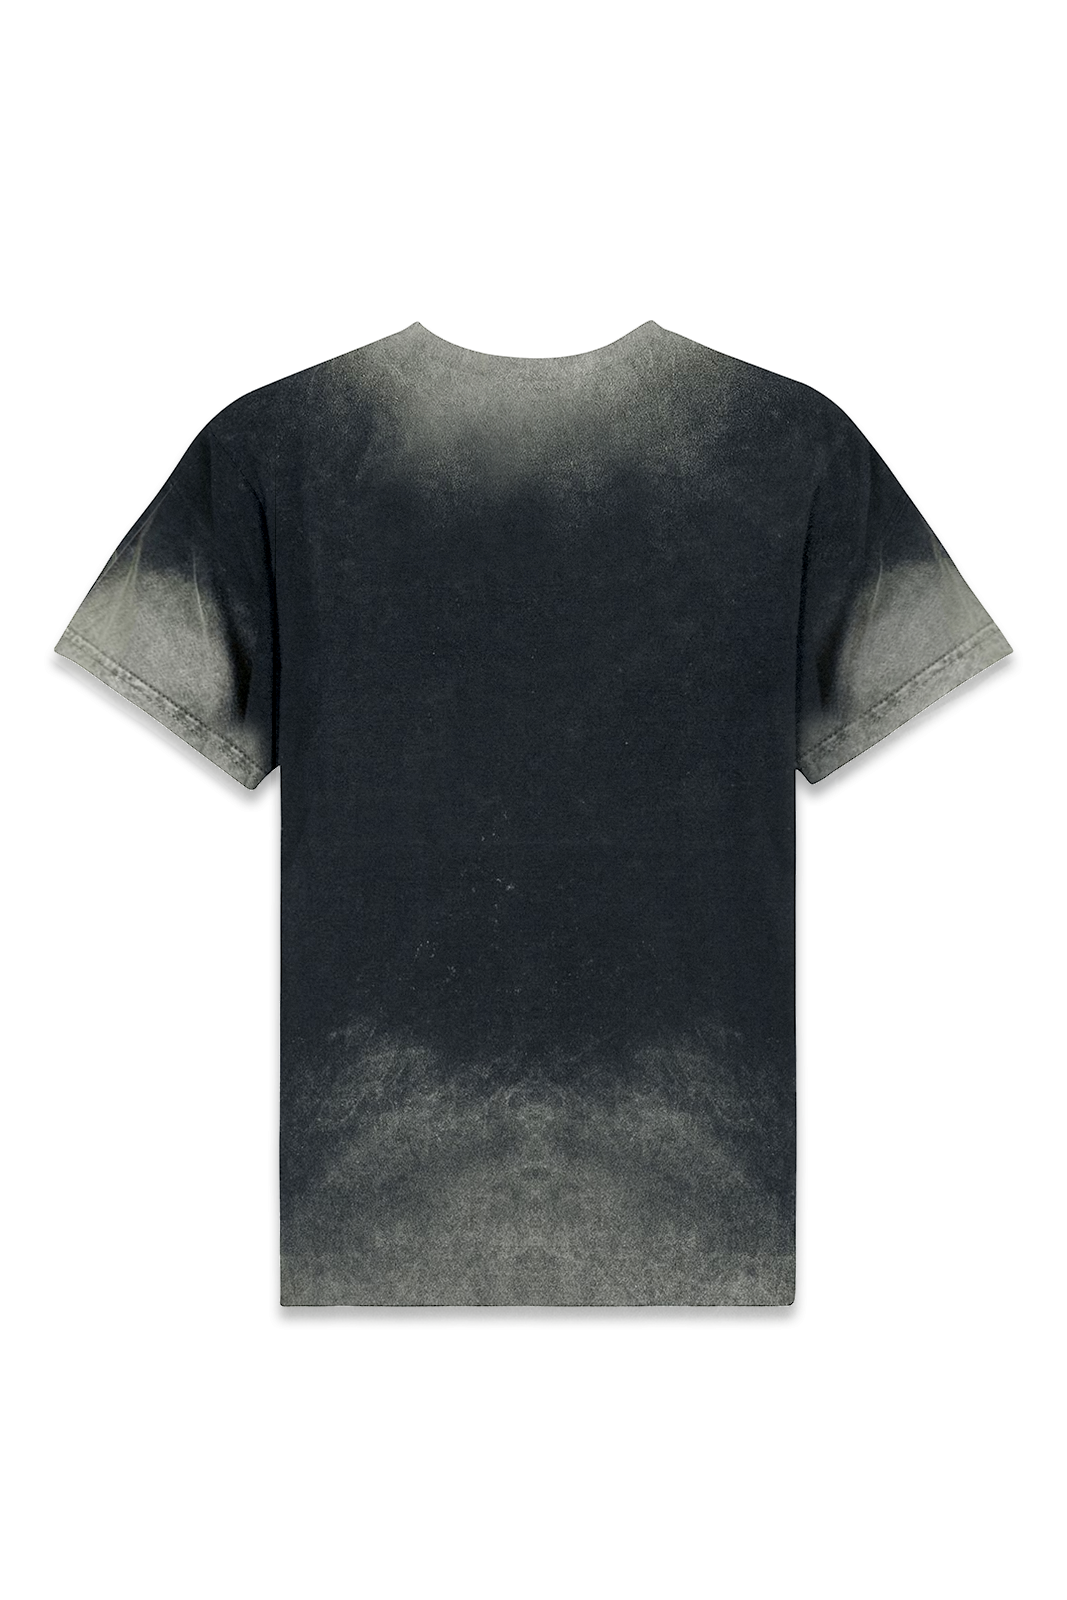 T-Shirt - Gronkh - Greetings from the Wastelands